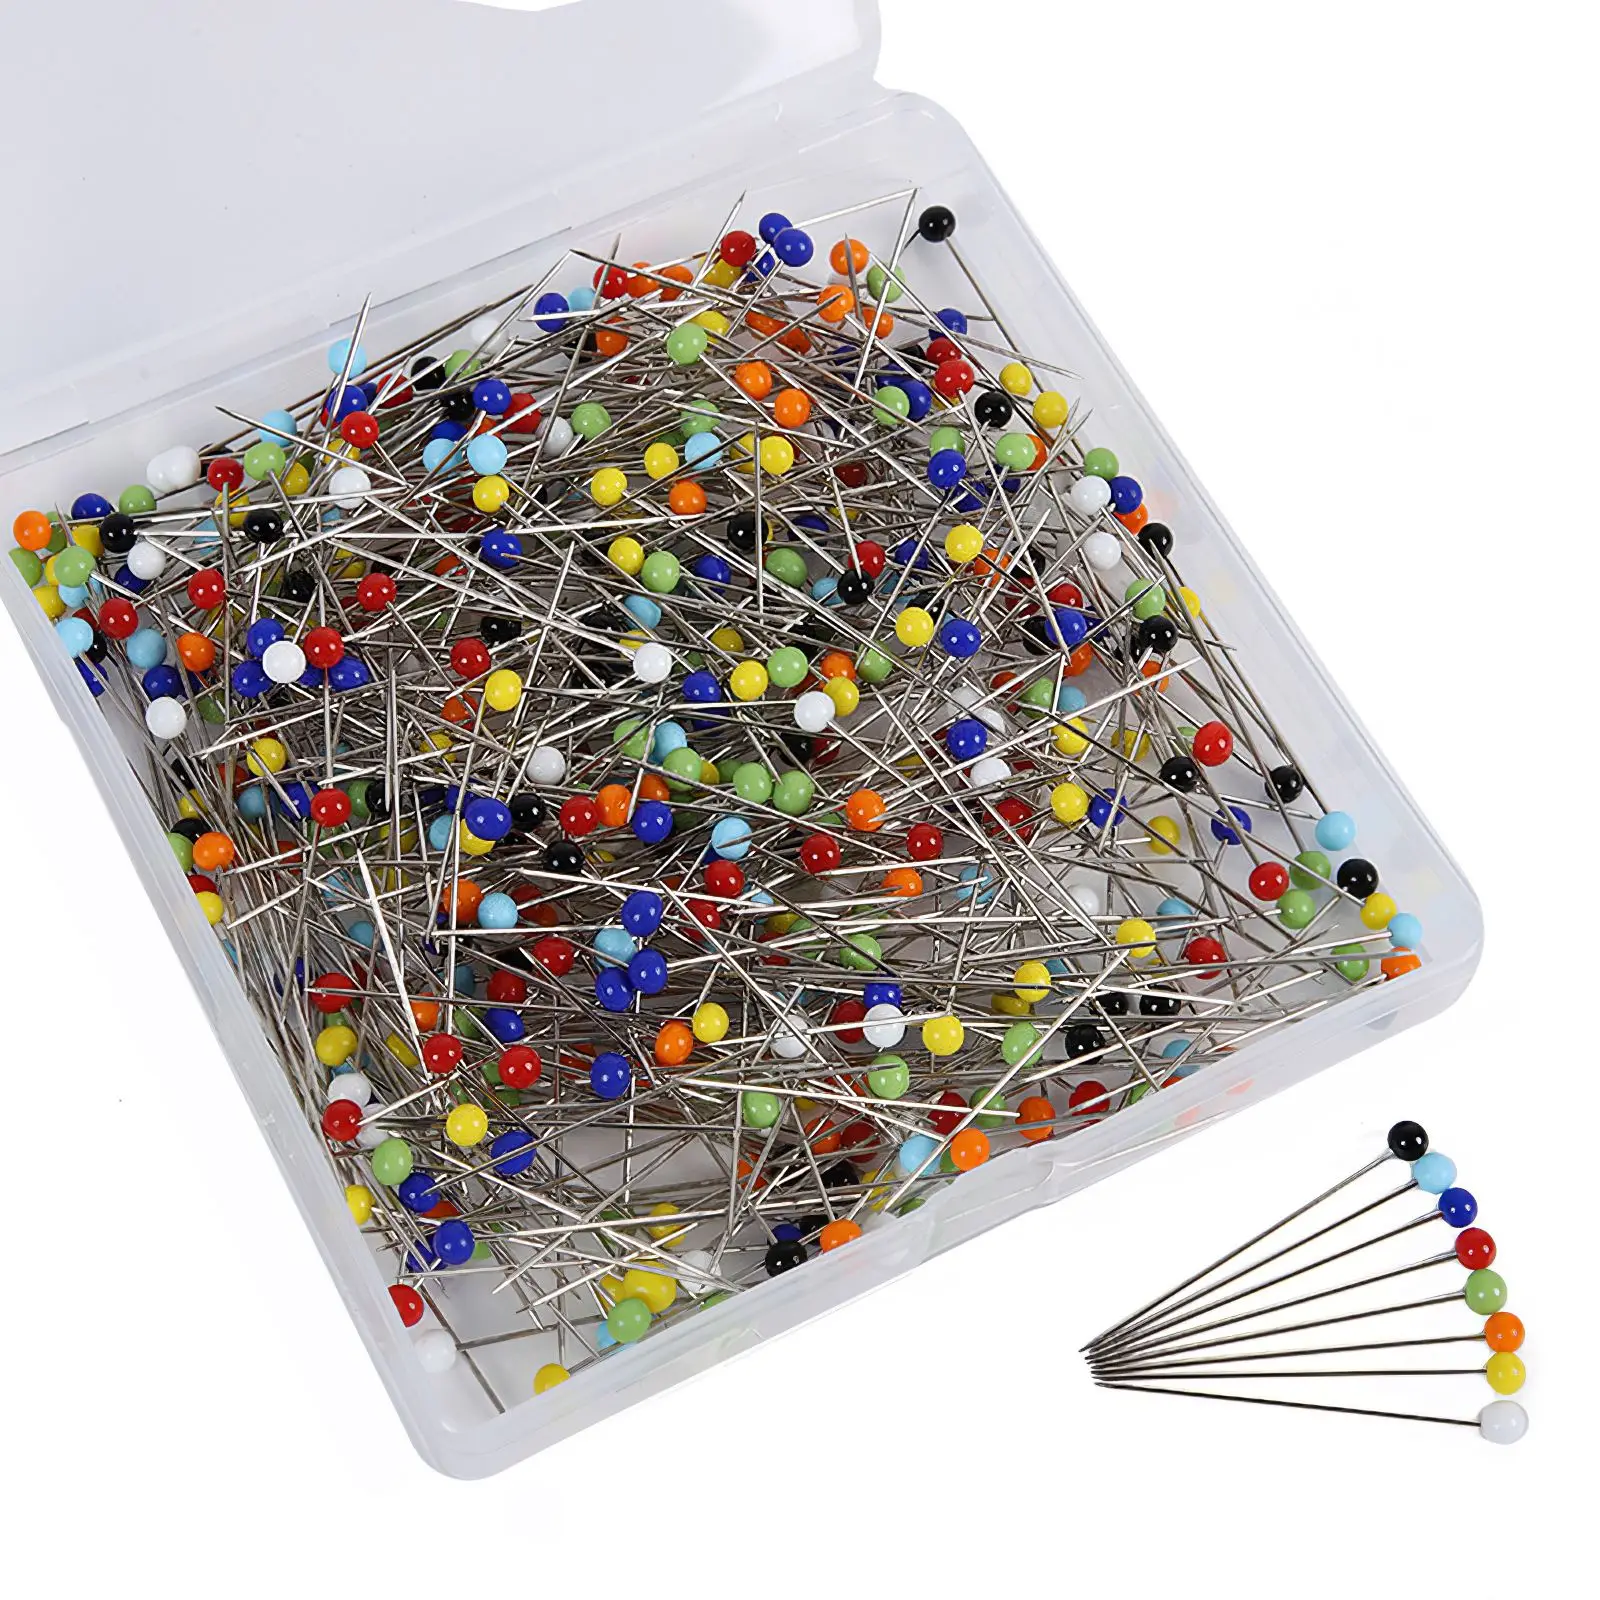 

250pcs Sewing Pins Straight Pins With Colored Glass Head Balls Quilting Pins For Fabric Dressmaker Craft And Sewing Project DIY